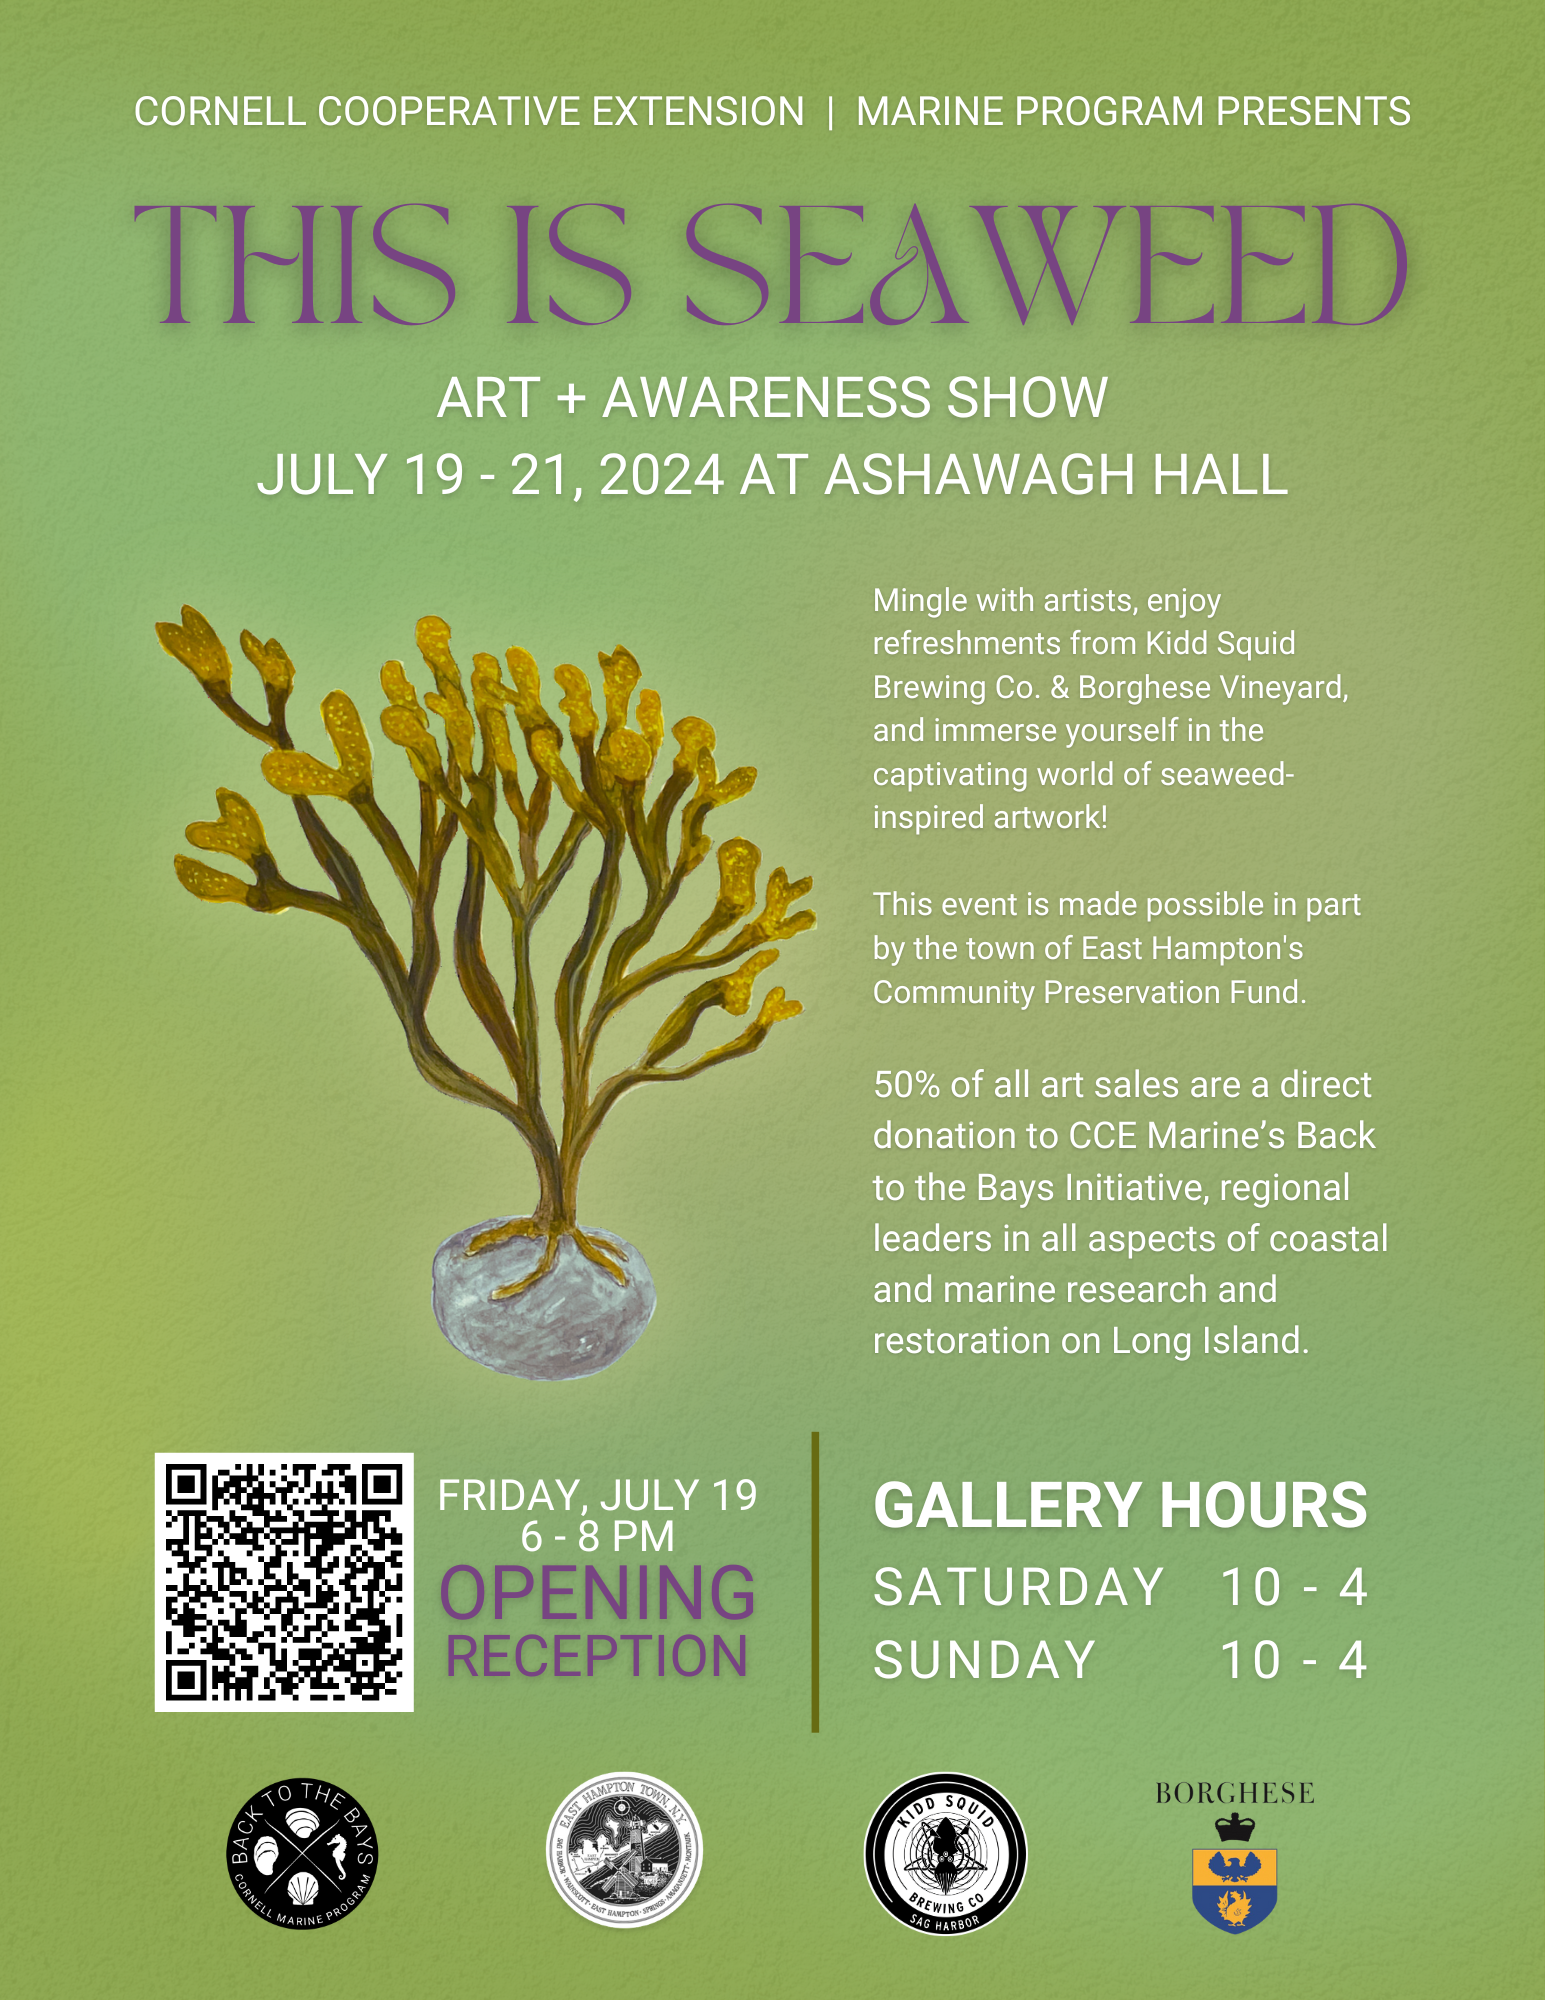 This is Seaweed Event at Ashawagh Hall July 2024